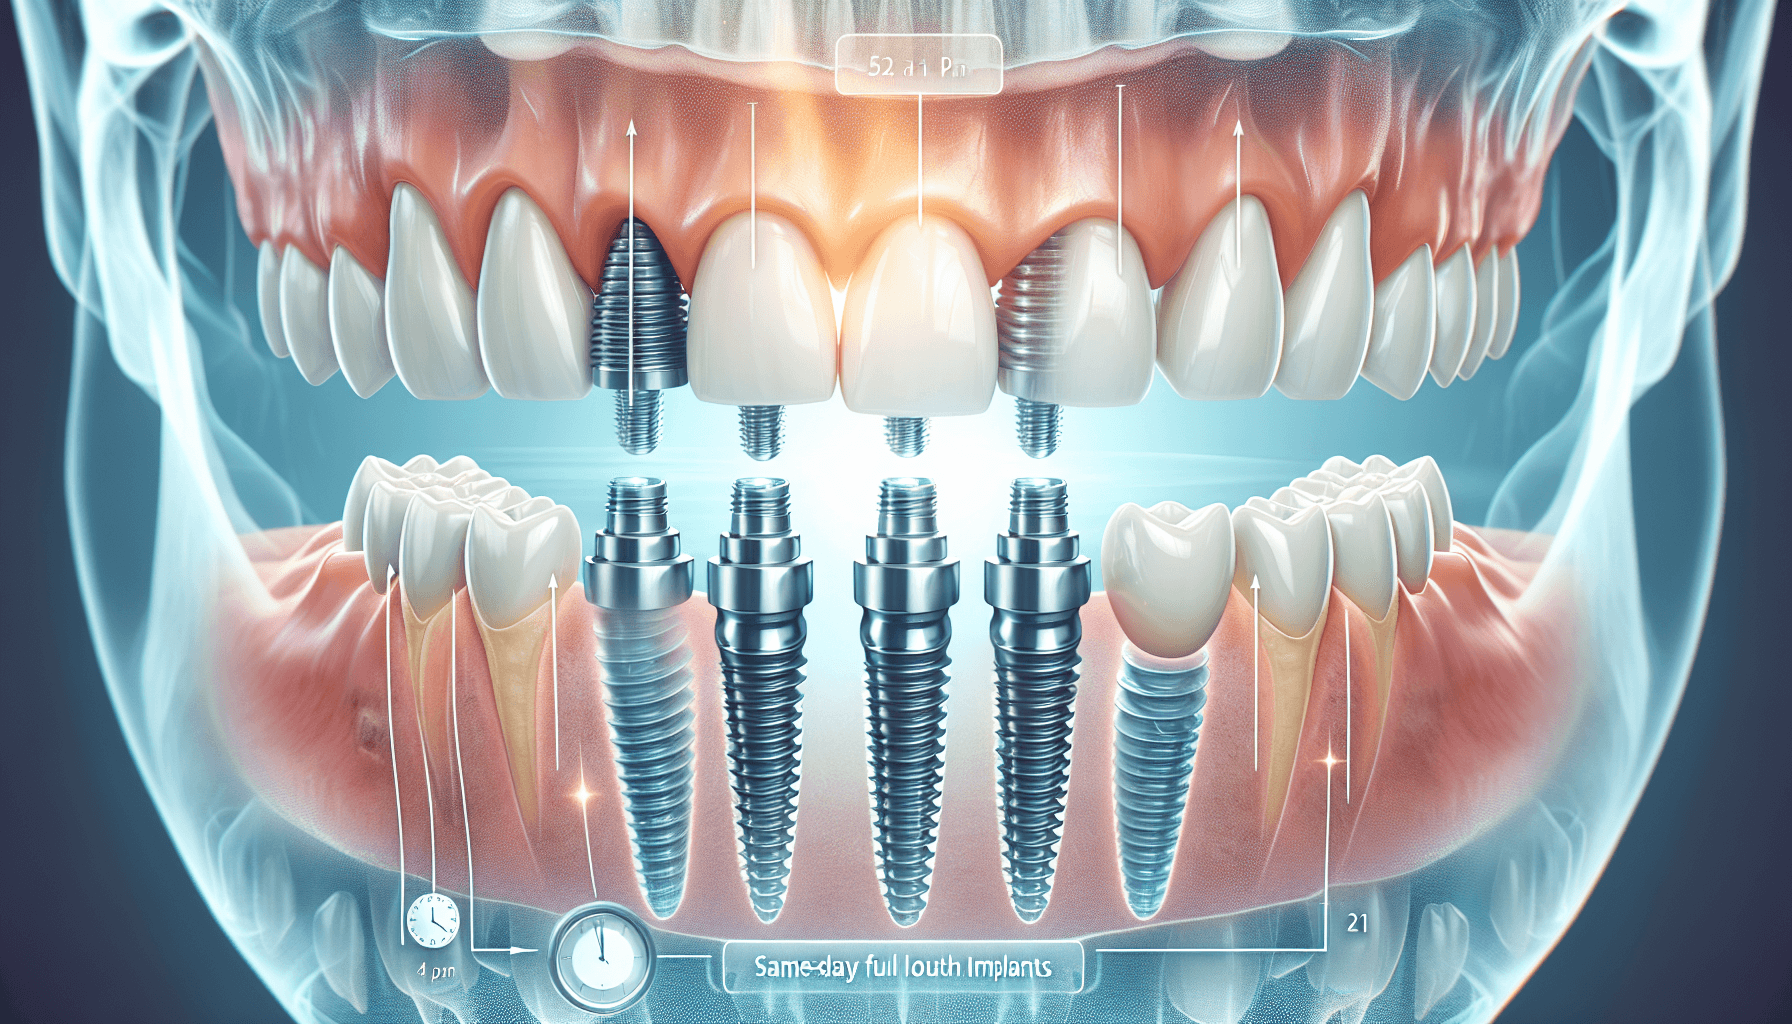 Illustration of same day full mouth implants procedure